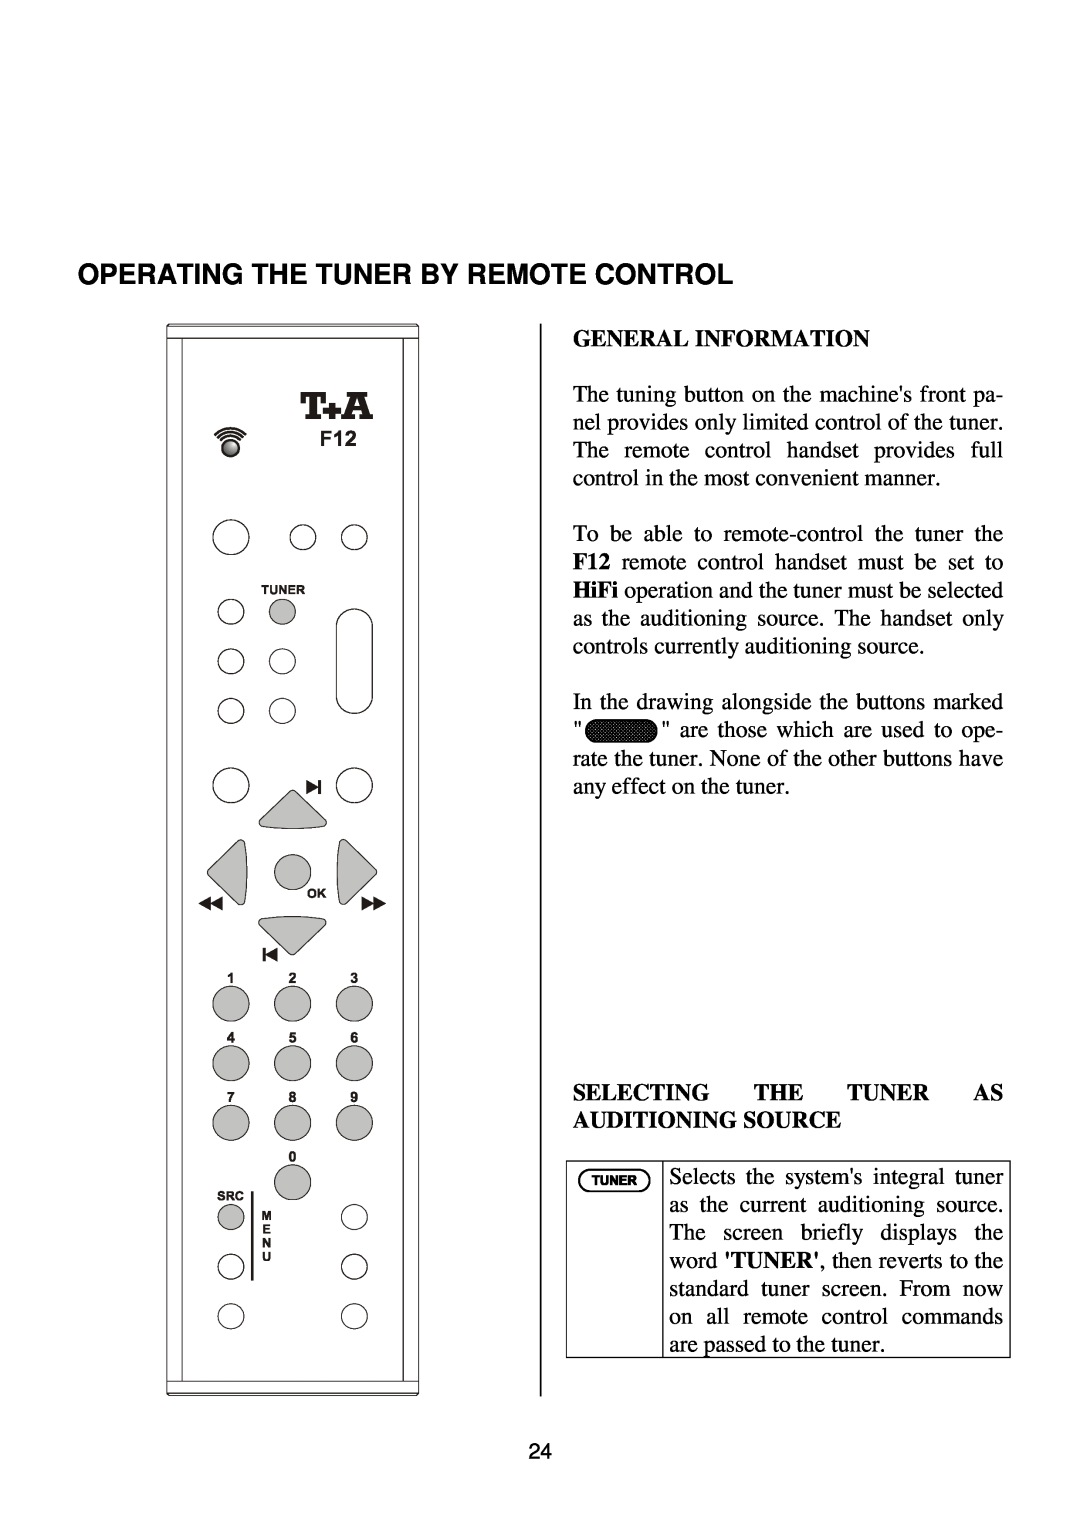 T+A Elektroakustik K1 CD-RECEIVER operating instructions Operating The Tuner By Remote Control, General Information 